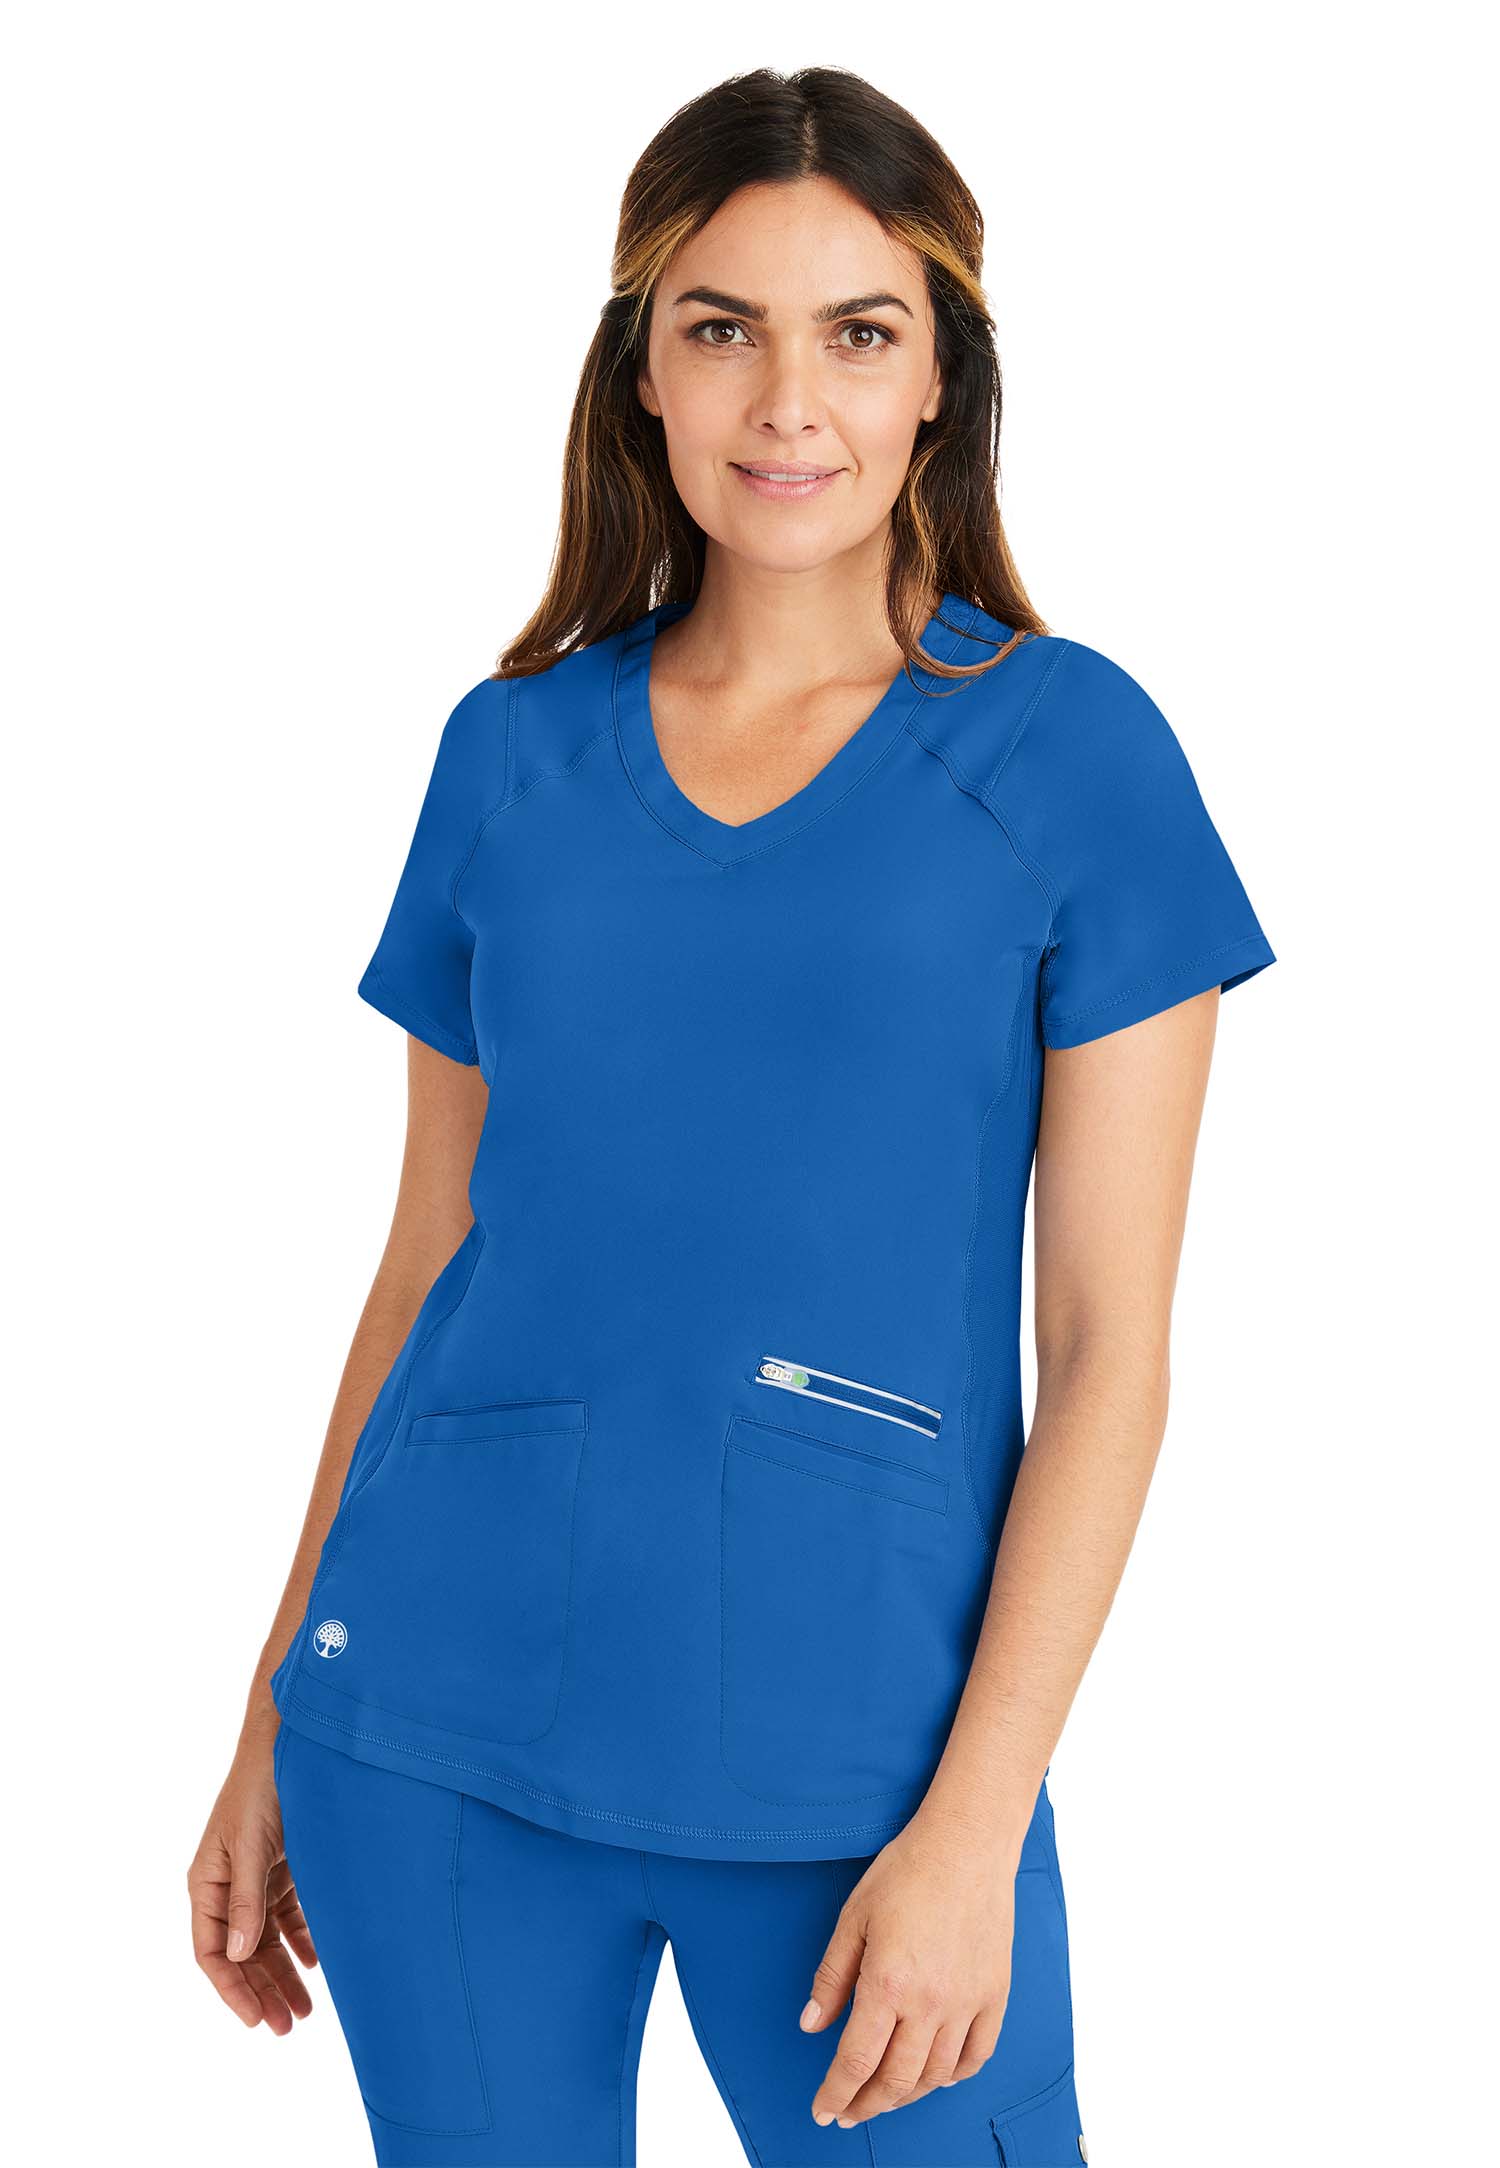 healing hands Womens Scrub Top 3 Pocket V-Neck Lightweight Breathable Fabric Scrub Tops for Women HH360 2284 Serena 